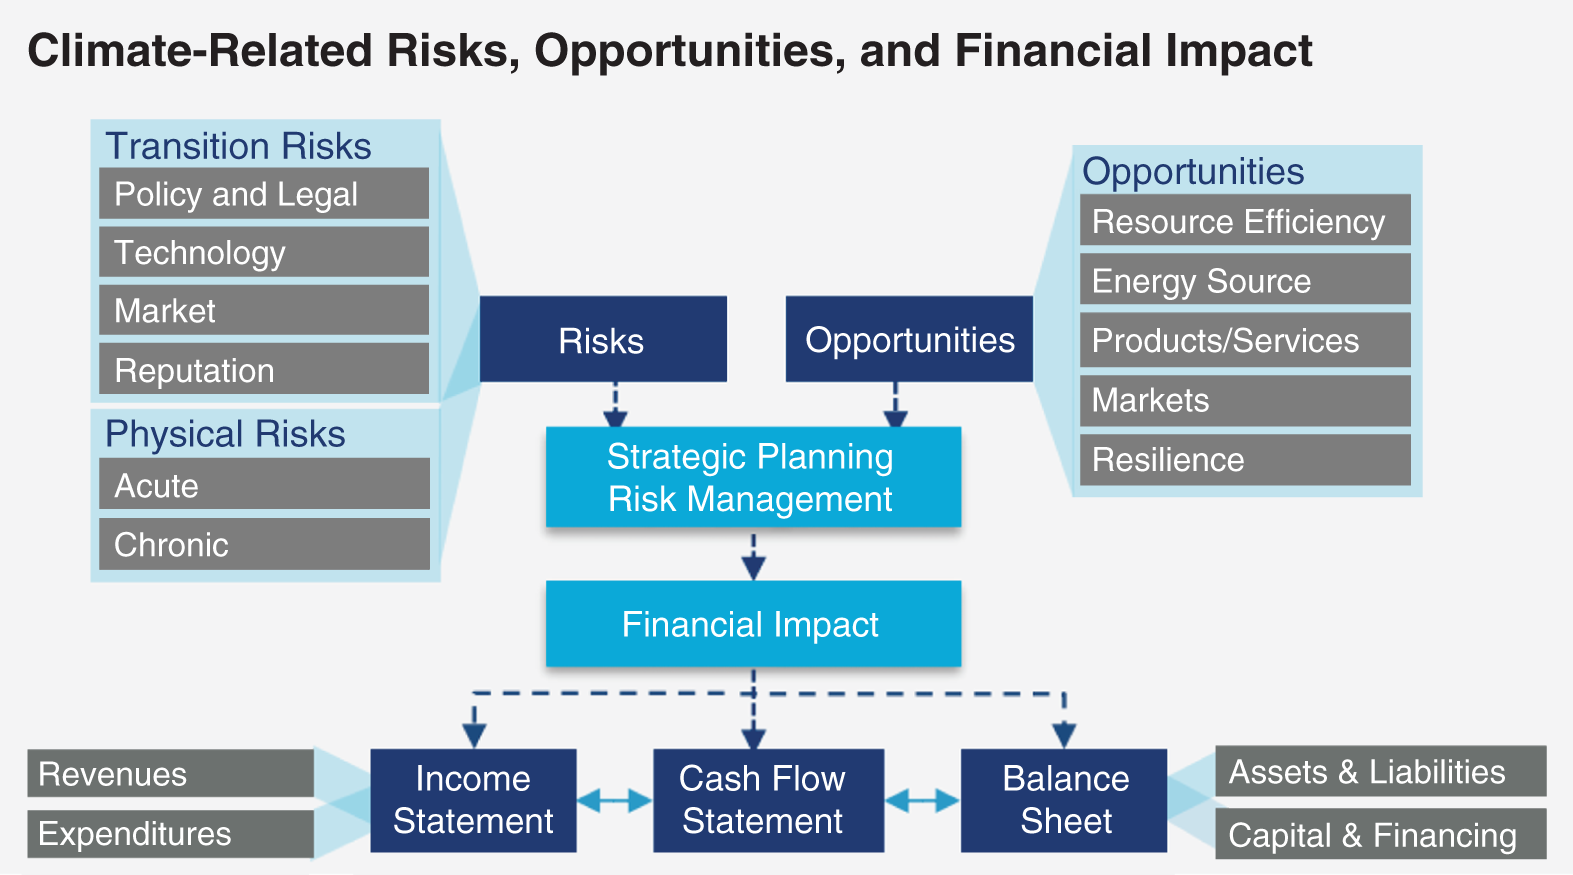 Schematic illustration of the climate-related risks, opportunities, and financial impact.